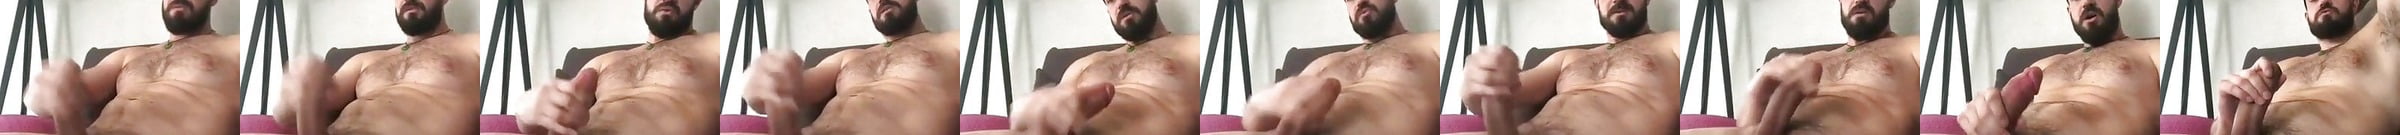 Beefy Keiran Xxl Jerkoff And Cum Gay Porn Bb Xhamster Xhamster